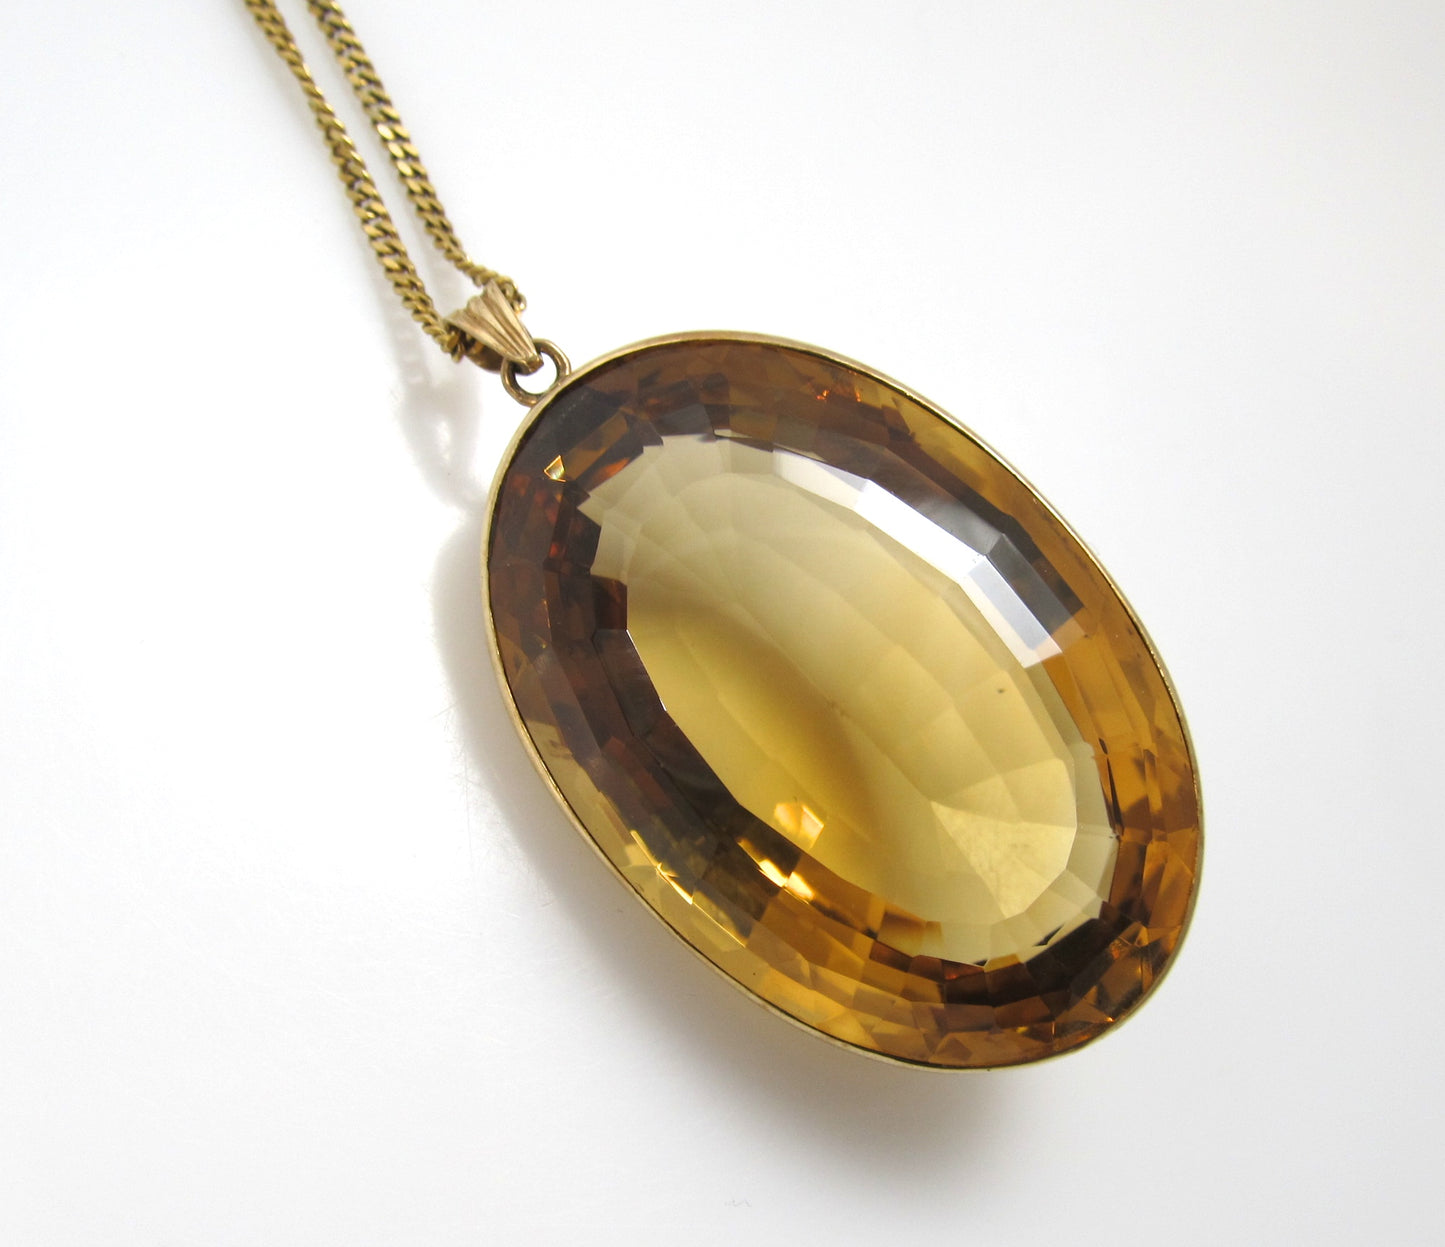 175.00ct natural citrine necklace, 14k yellow gold